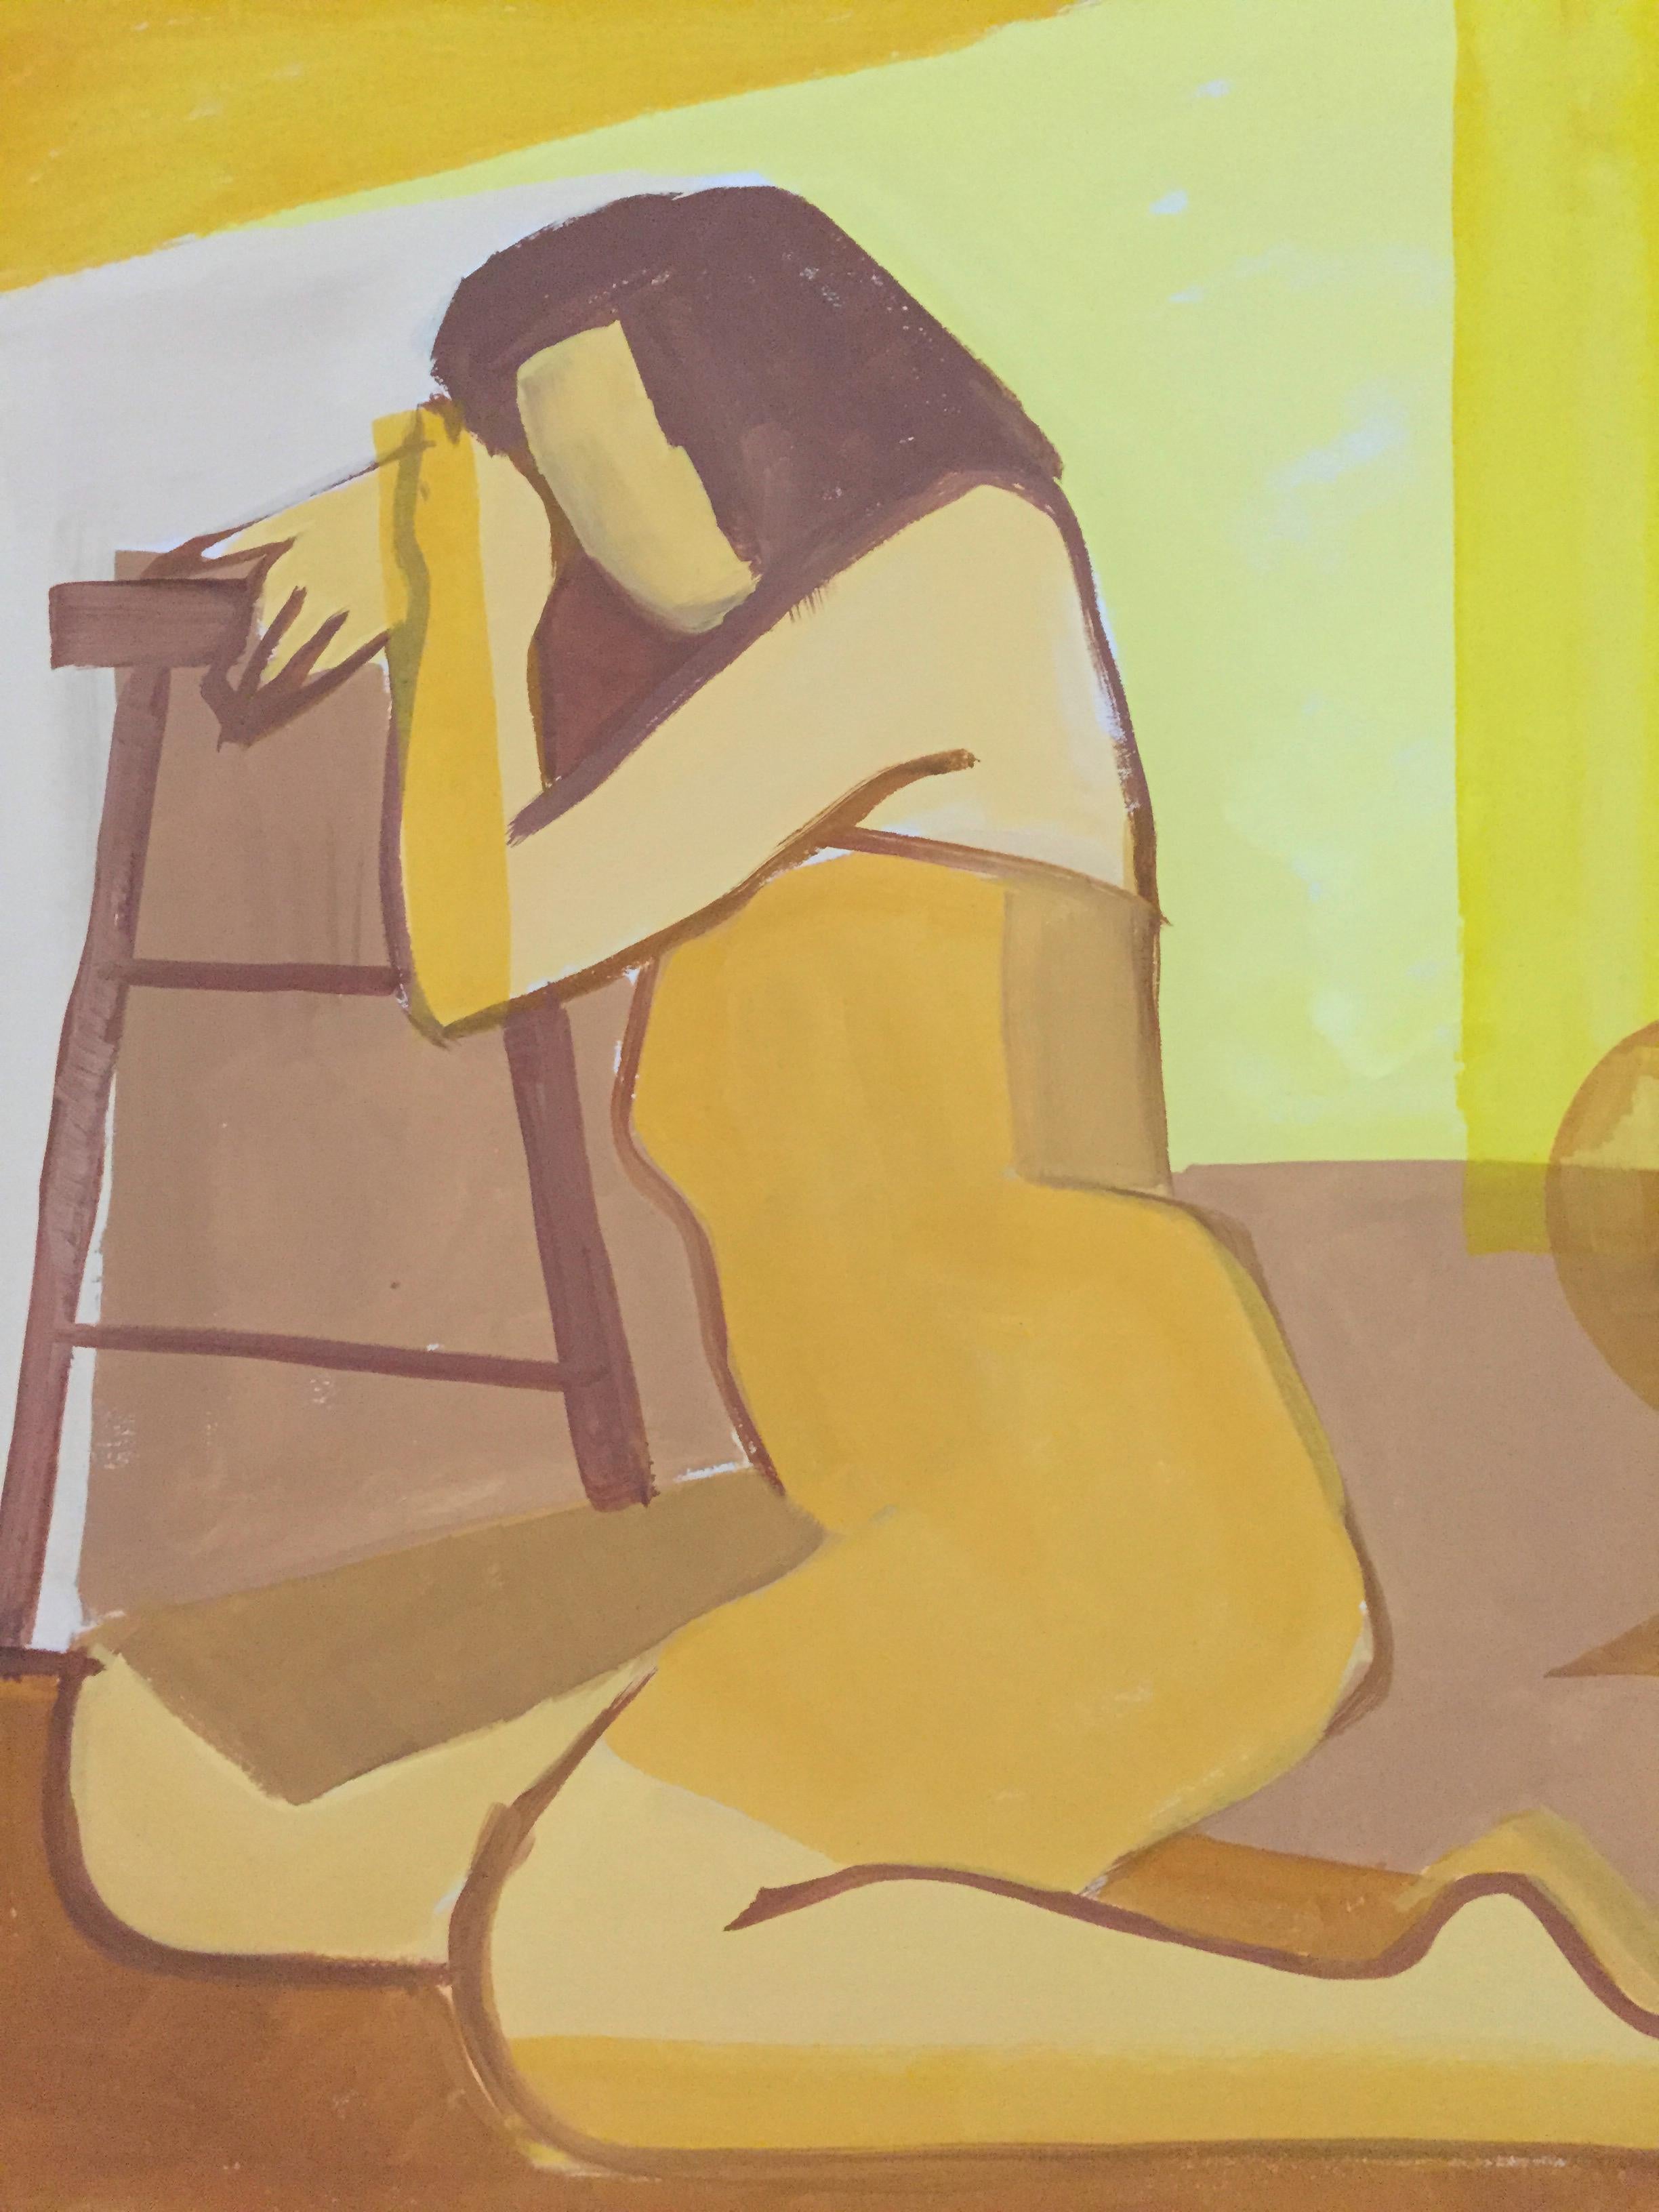 From the estate of Jerry Opper & Ruth Friedman Opper
Yellow
c. 1950's
Gouache on Paper
15